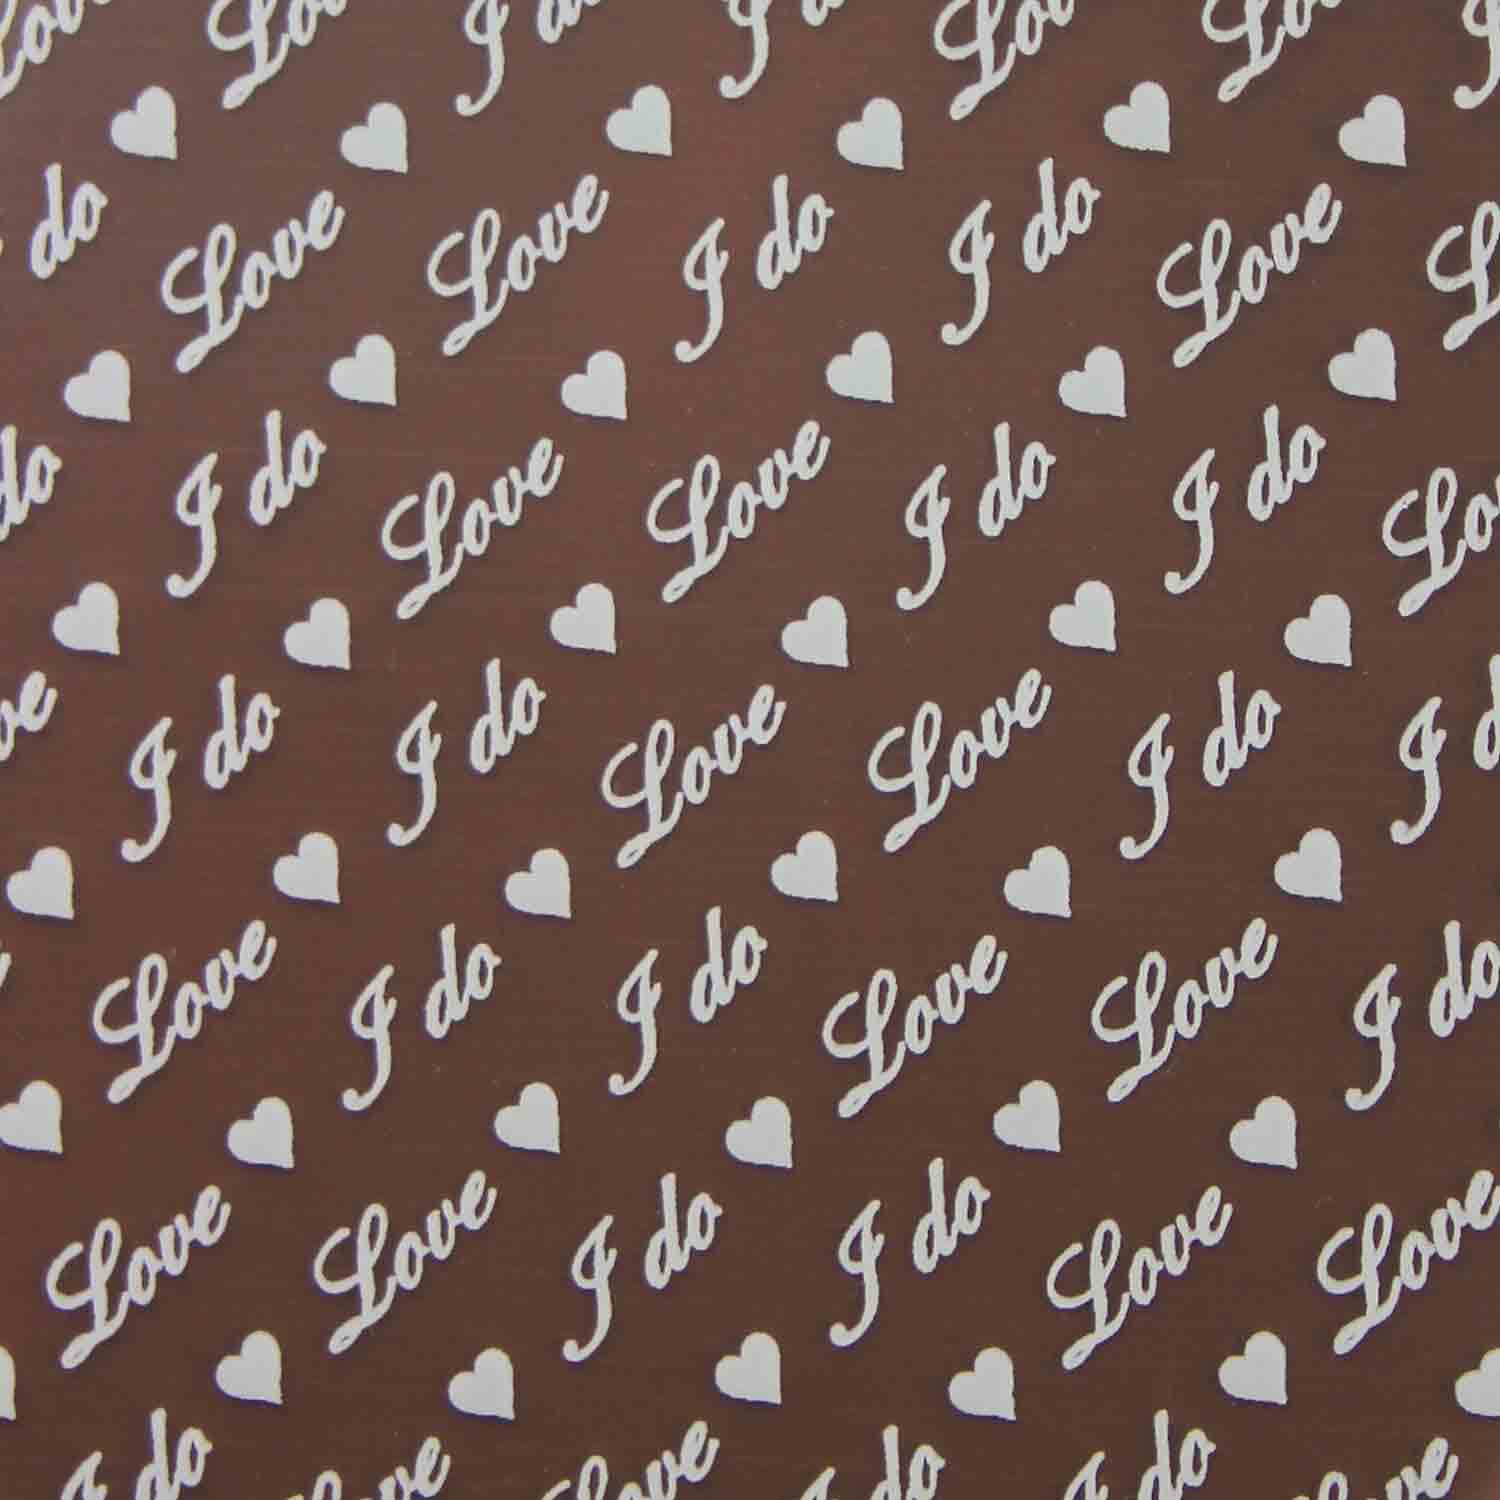 chocolate transfer sheets